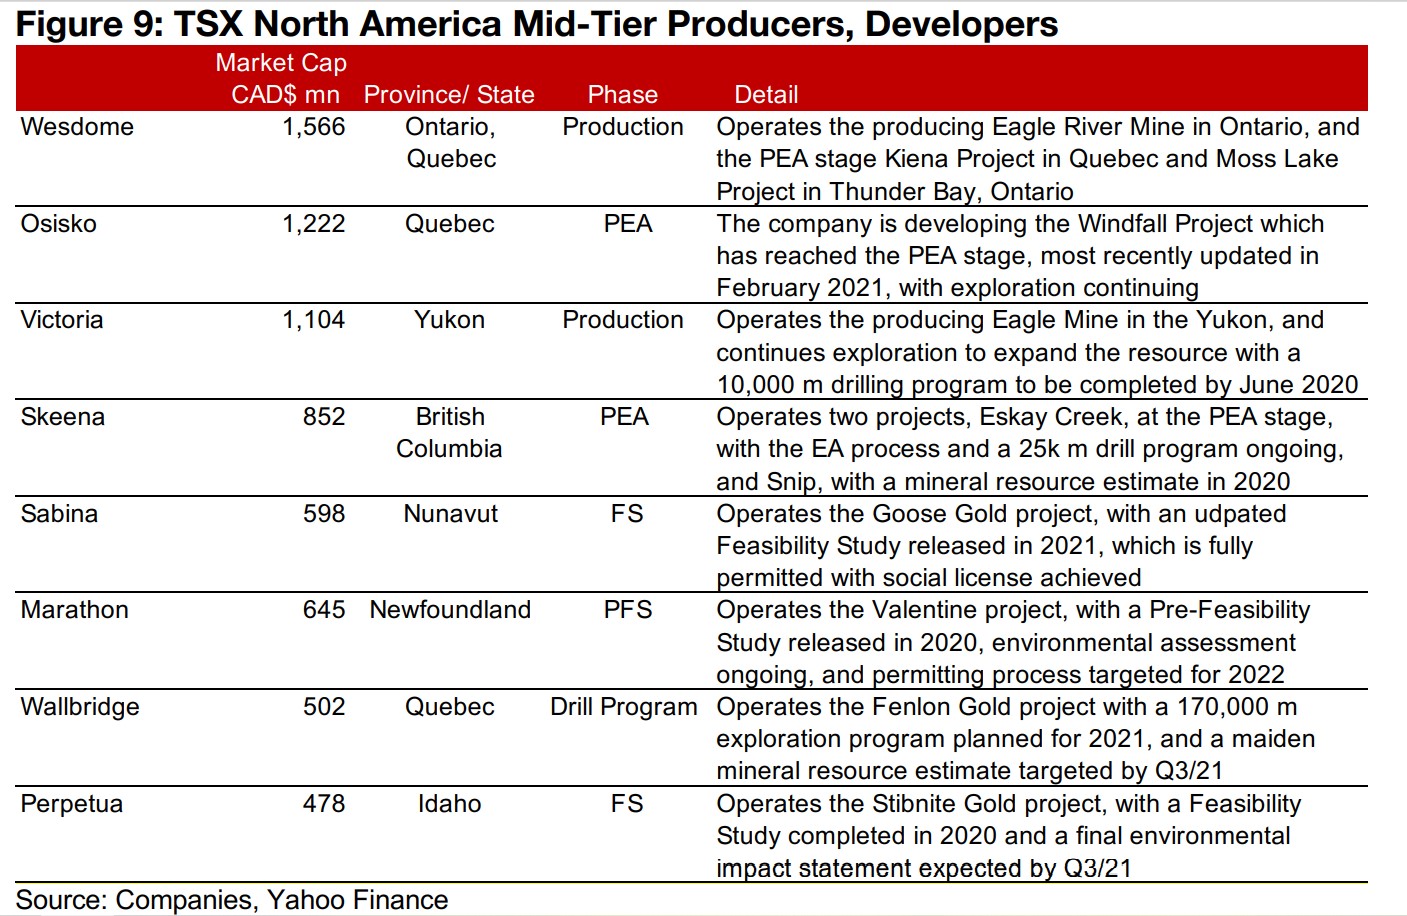 2) TSX North American Producers, Developers